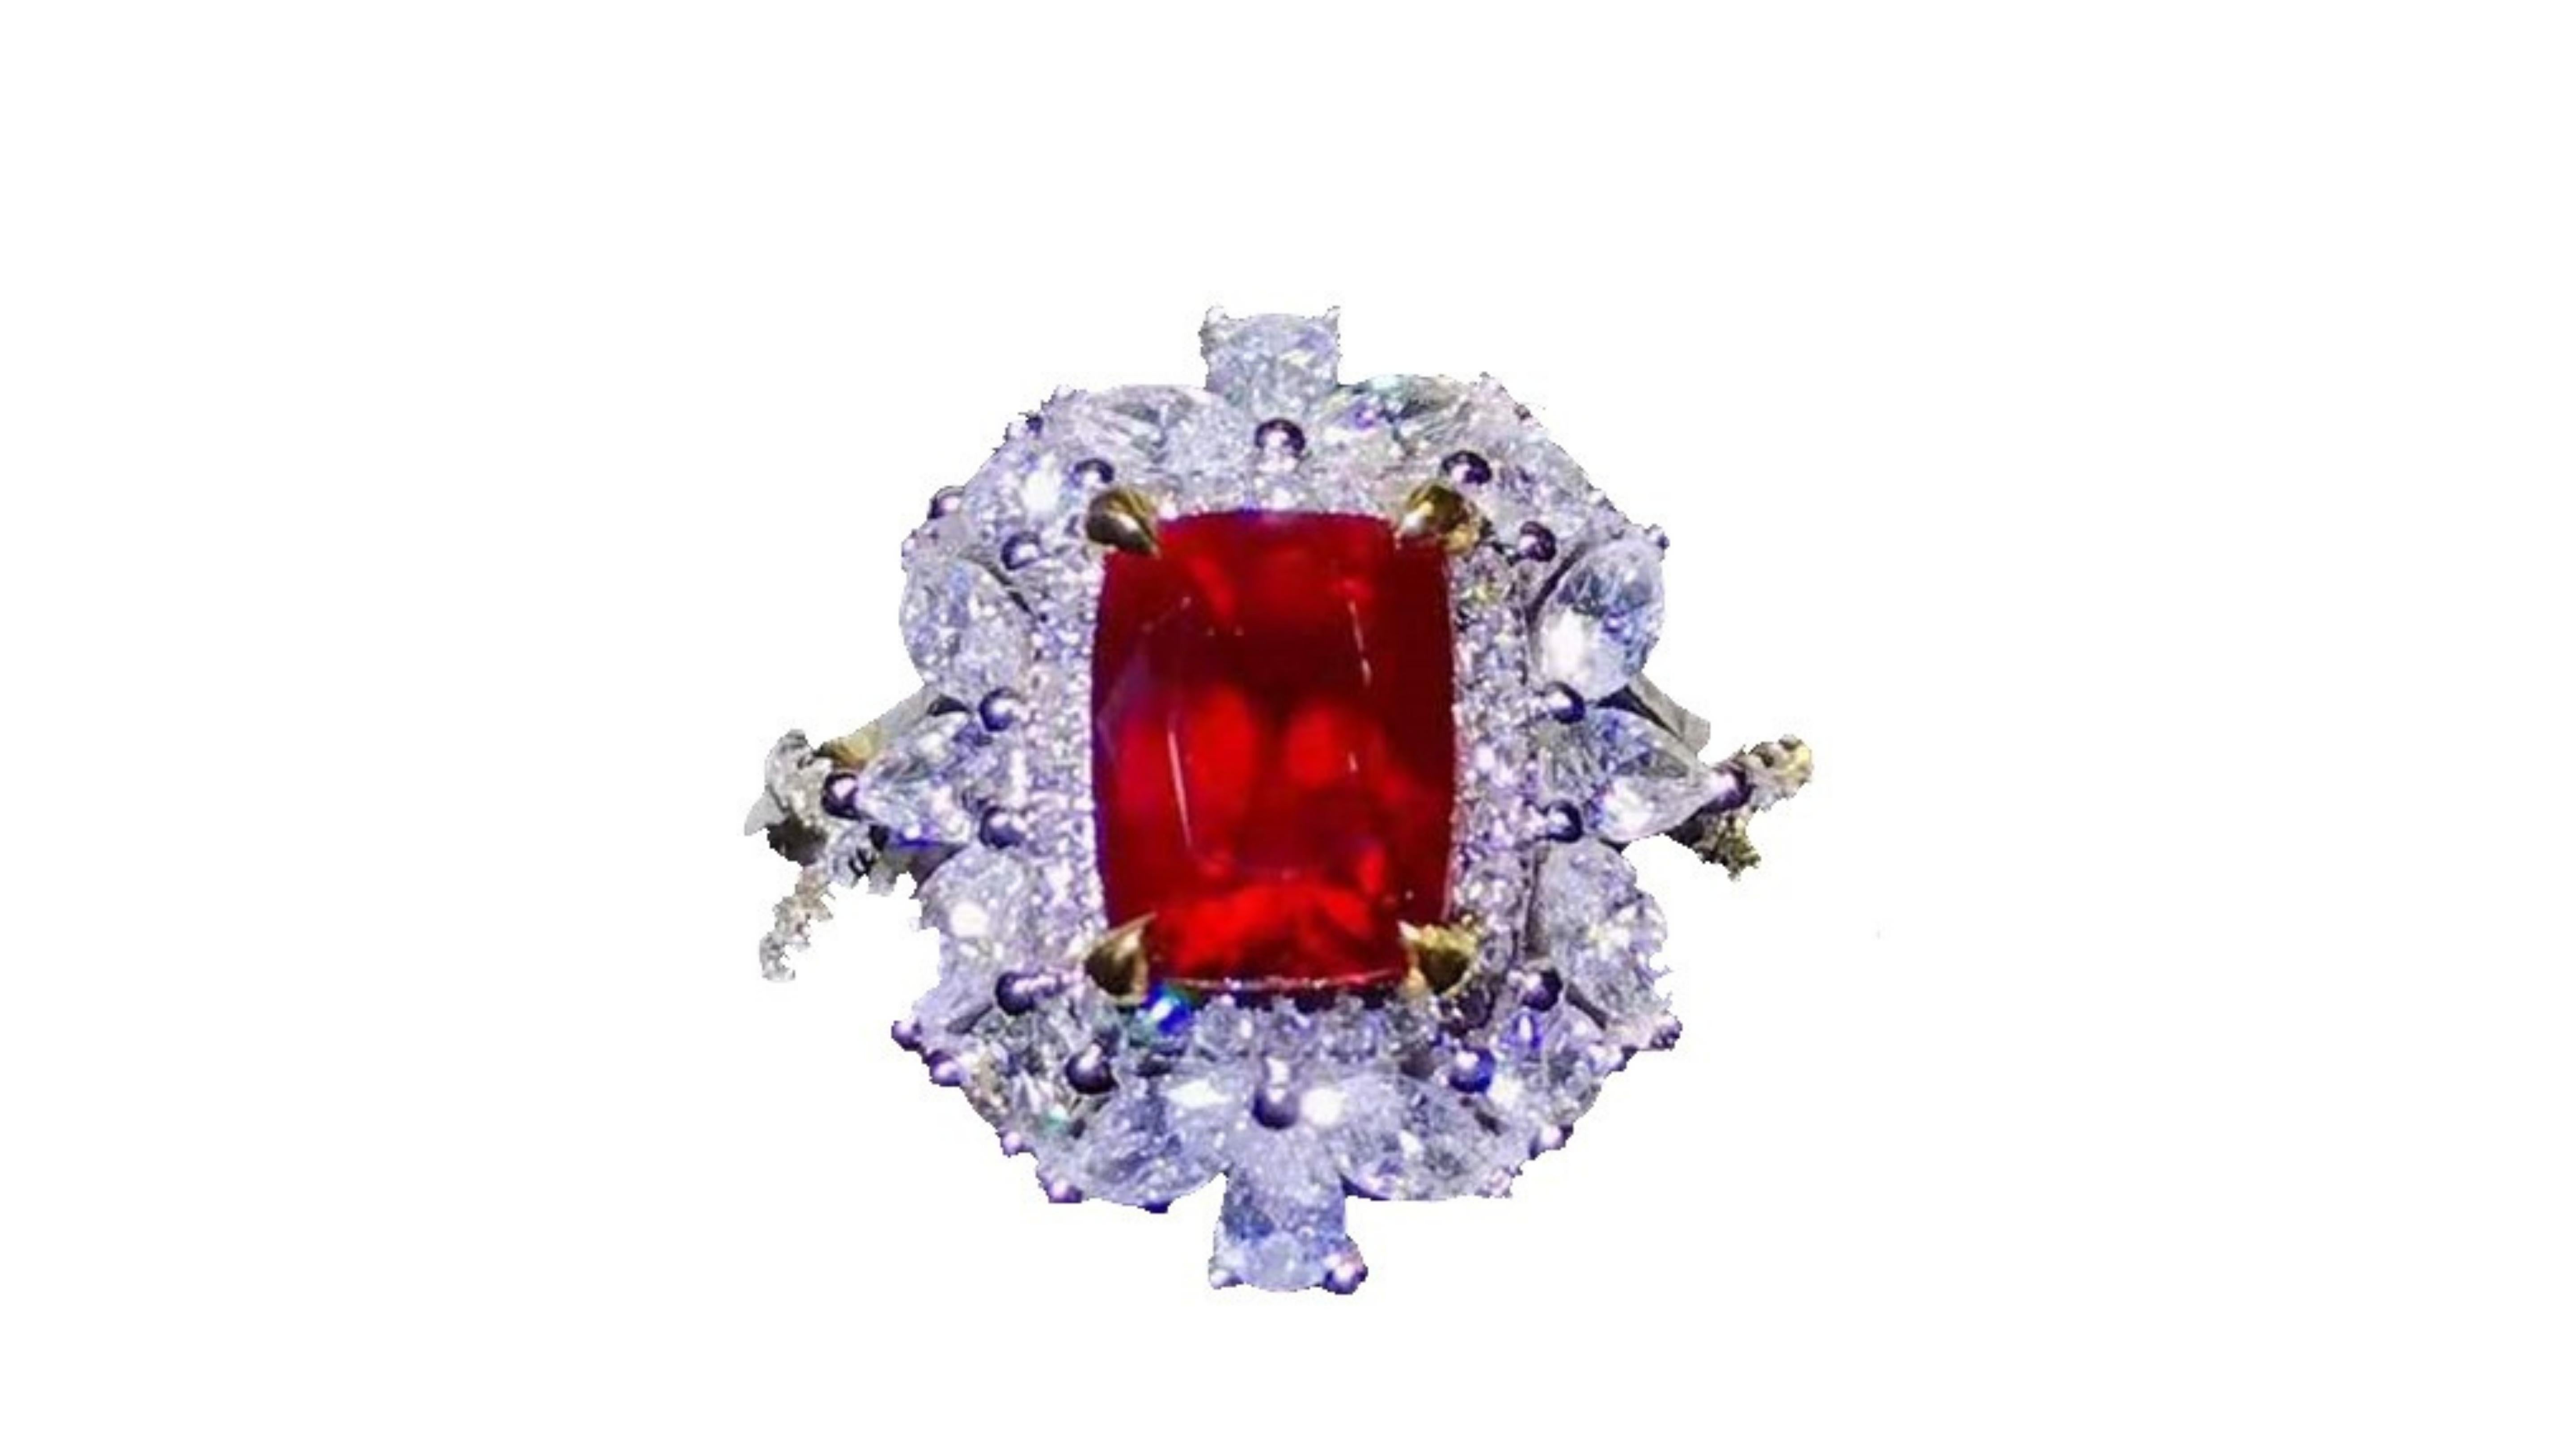 
2.03 Carat Ruby Pigeon Red Blood Ring  with 66 White Diamonds in a Vintage Style   and ones around the centre stone are 1.21 Carat . Set in 18 Karat White Gold.  Its also unheated where most ruby stones are.  This one is from Mozambique and we have